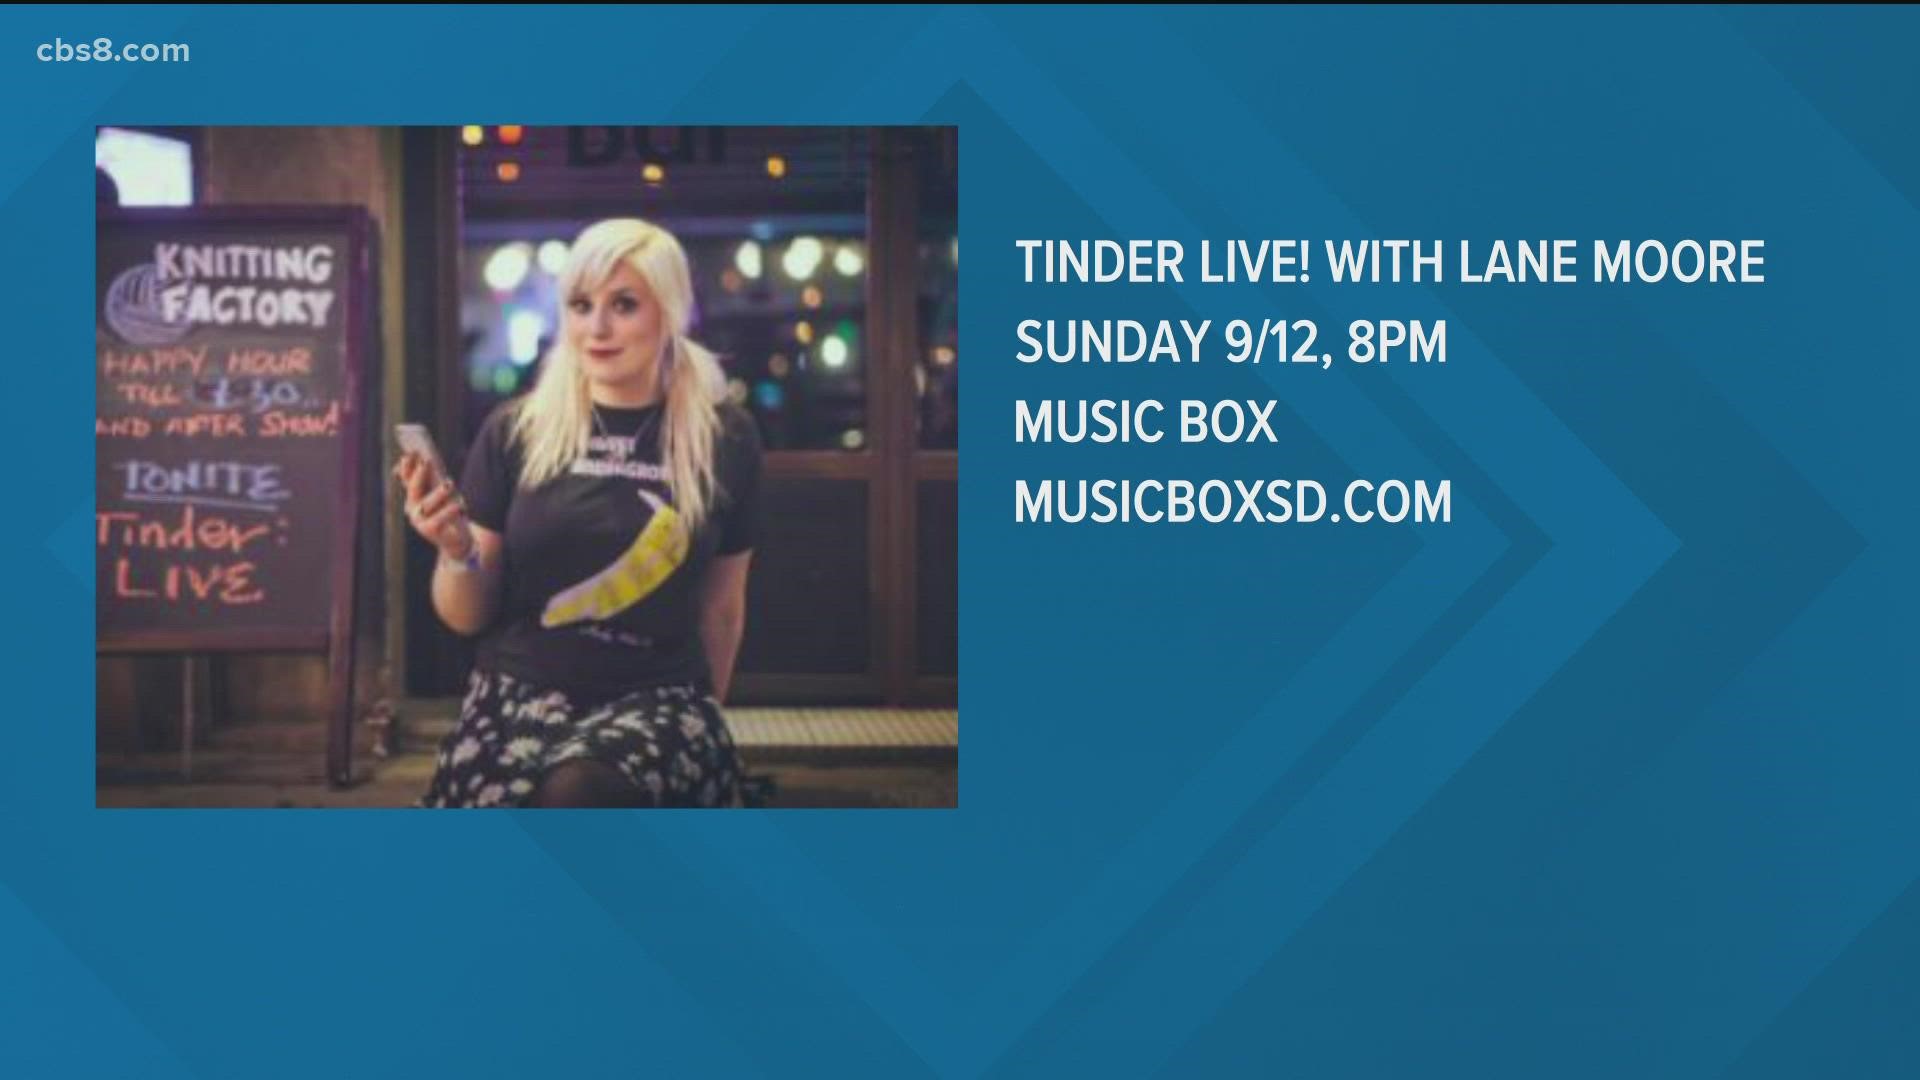 Lane Moore is a comedian, musician and author. On Sunday, she'll be doing a show called, "Tinder Live with Lane Moore" at The Music Box.